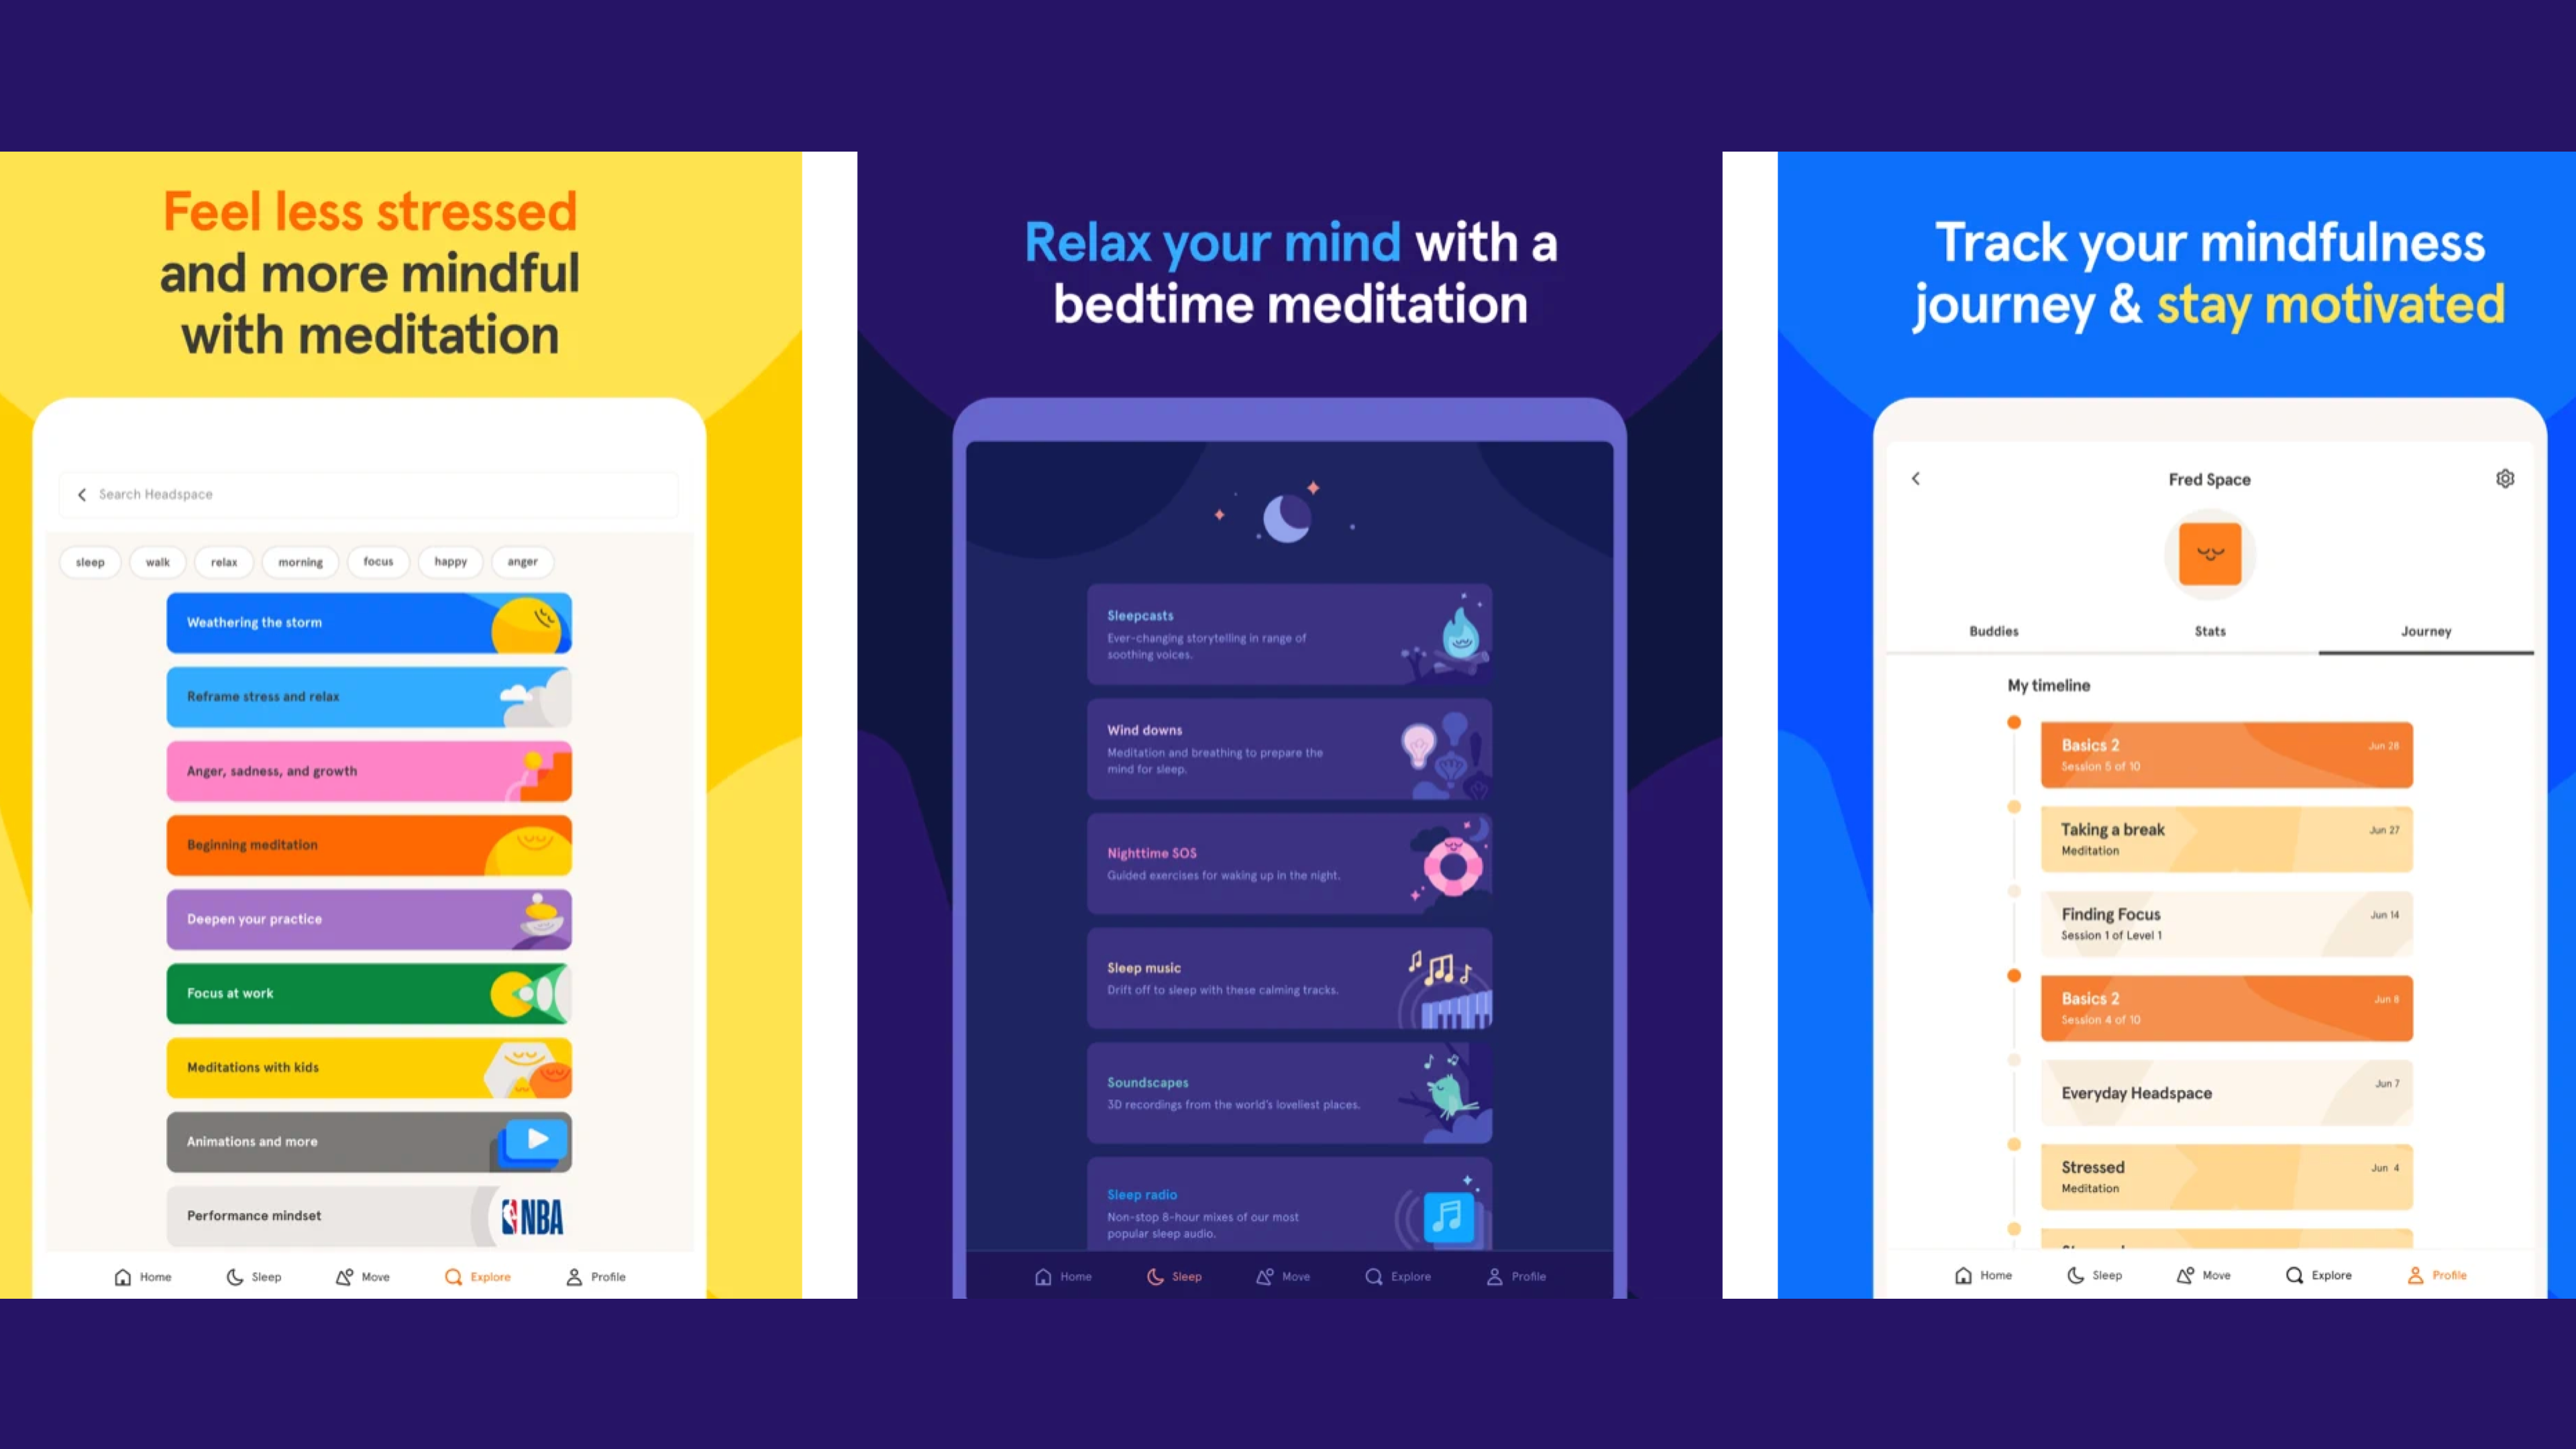 meditation app that provides guided meditations for topics like stress, anxiety, and sleep